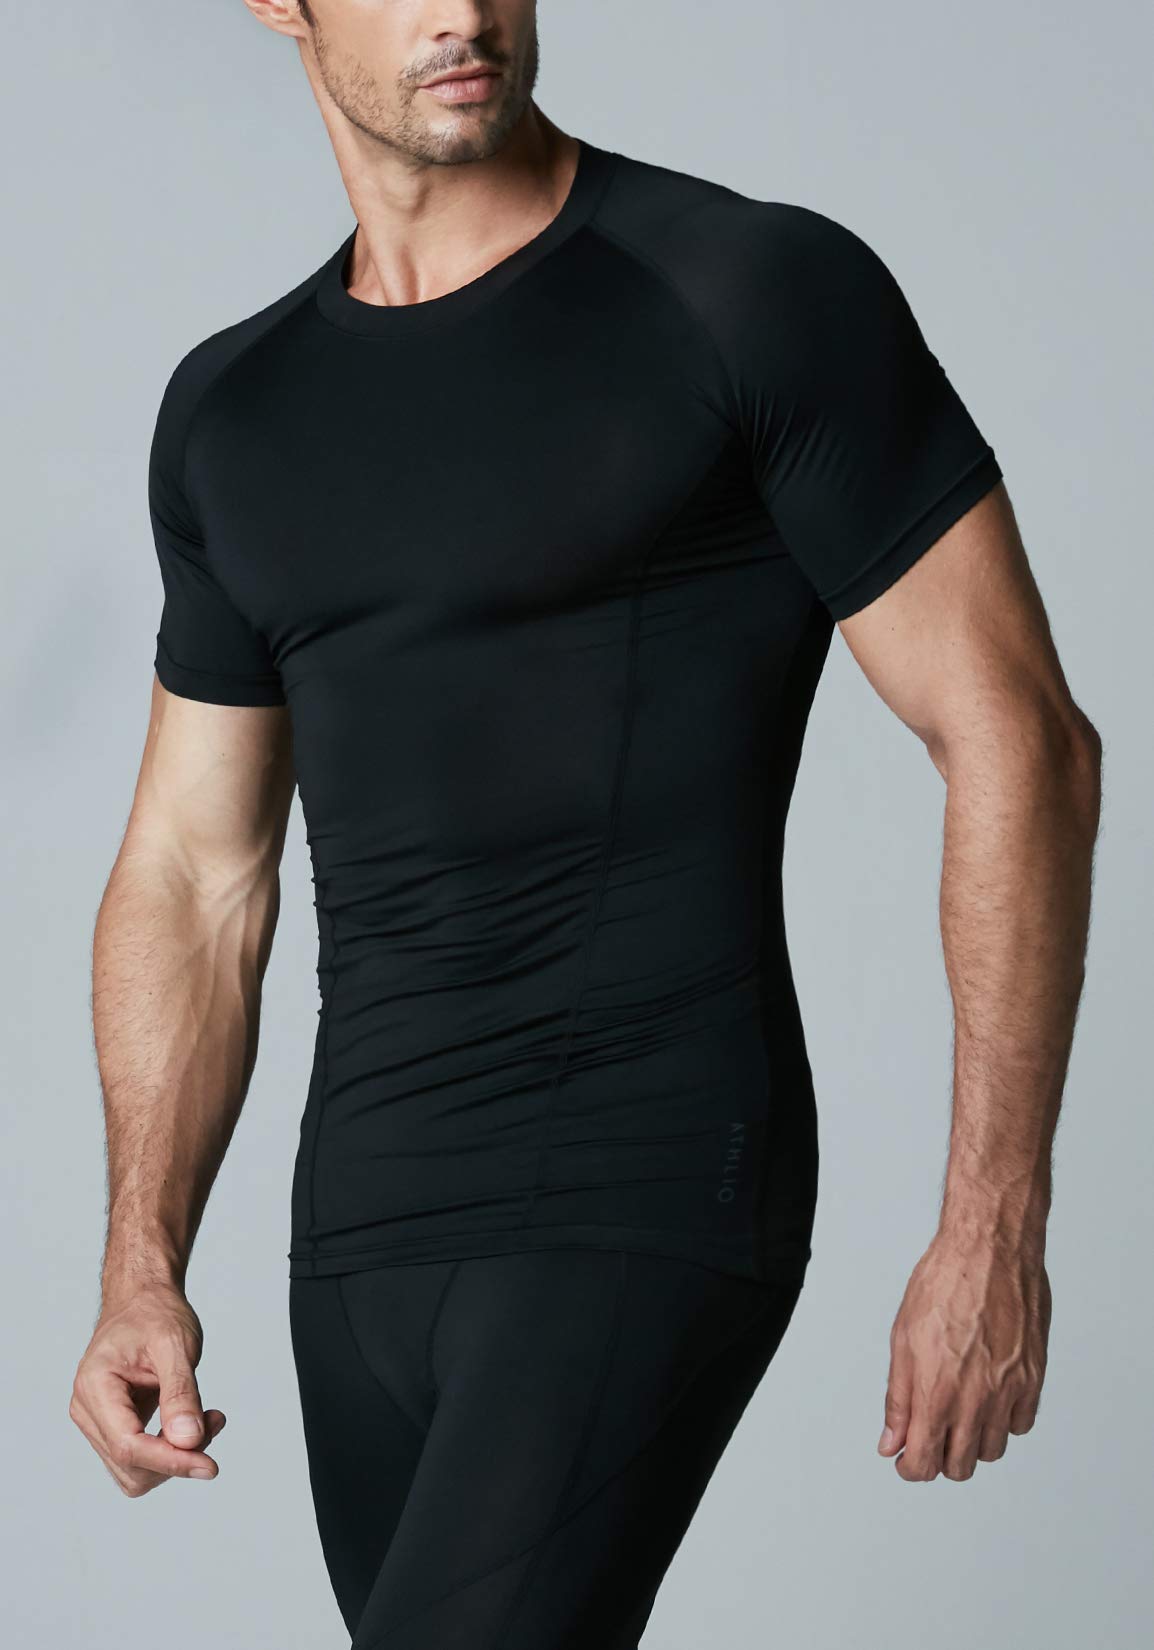 Sports Baselayer T-Shirts Tops ATHLIO 1 or 3 Pack Men's Cool Dry Short Sleeve Compression Shirts Athletic Workout Shirt 